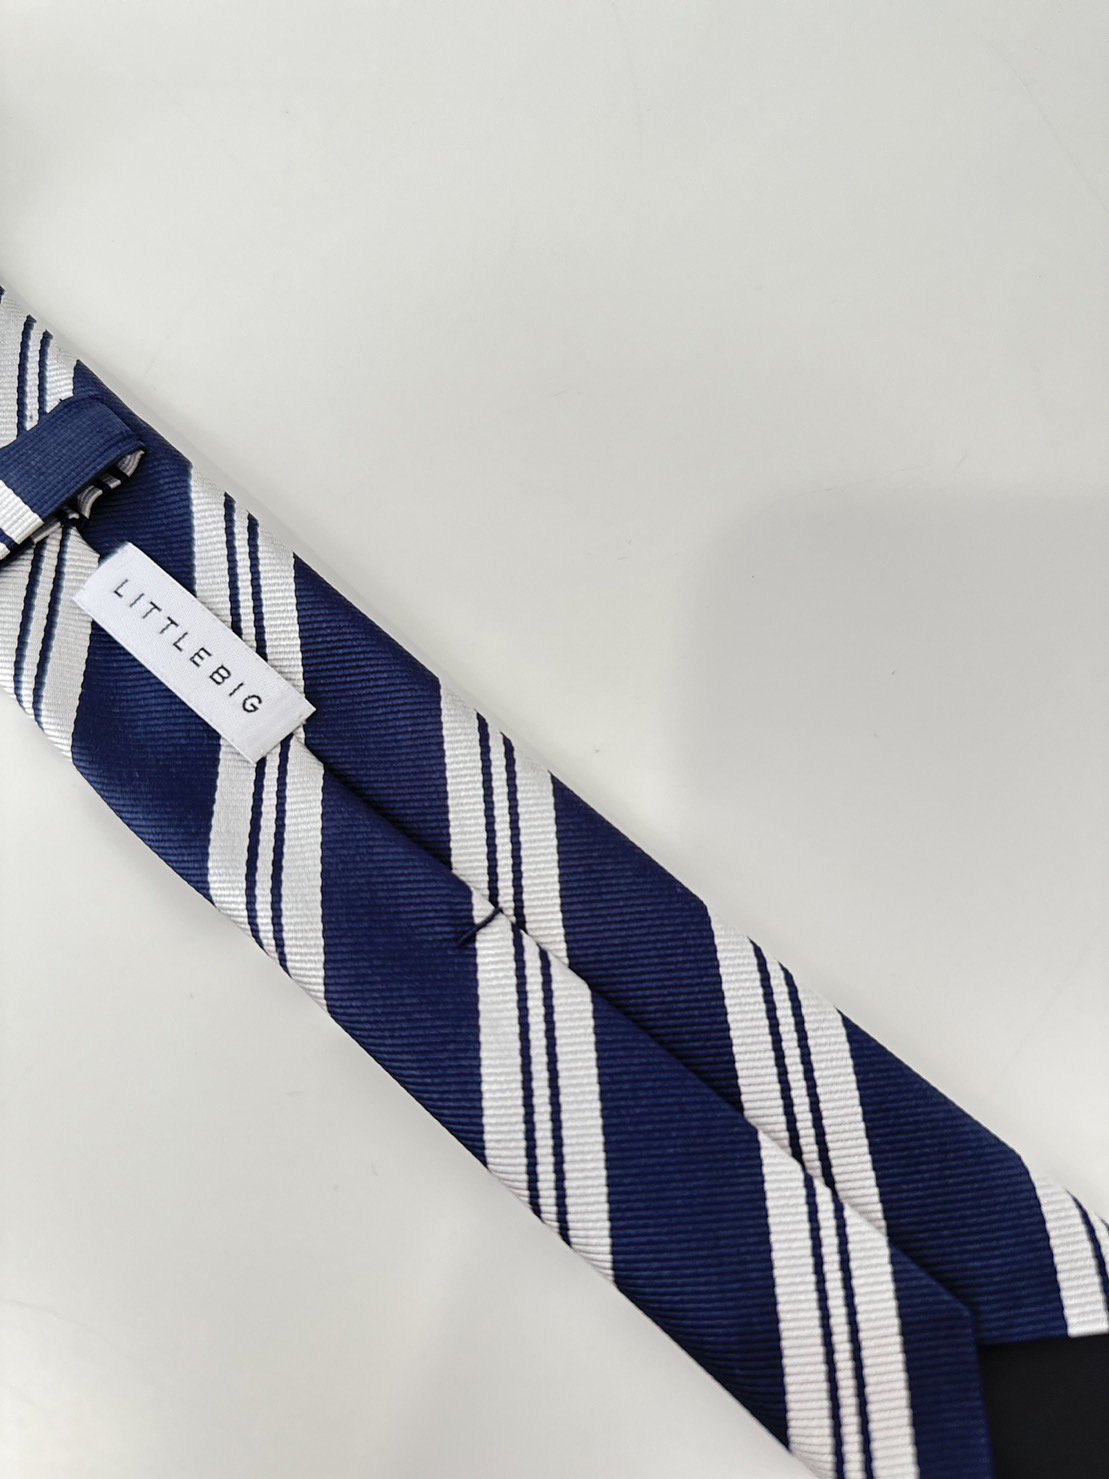 LITTLEBIG<br />Resimental Tie 1 / Navy<img class='new_mark_img2' src='https://img.shop-pro.jp/img/new/icons14.gif' style='border:none;display:inline;margin:0px;padding:0px;width:auto;' />